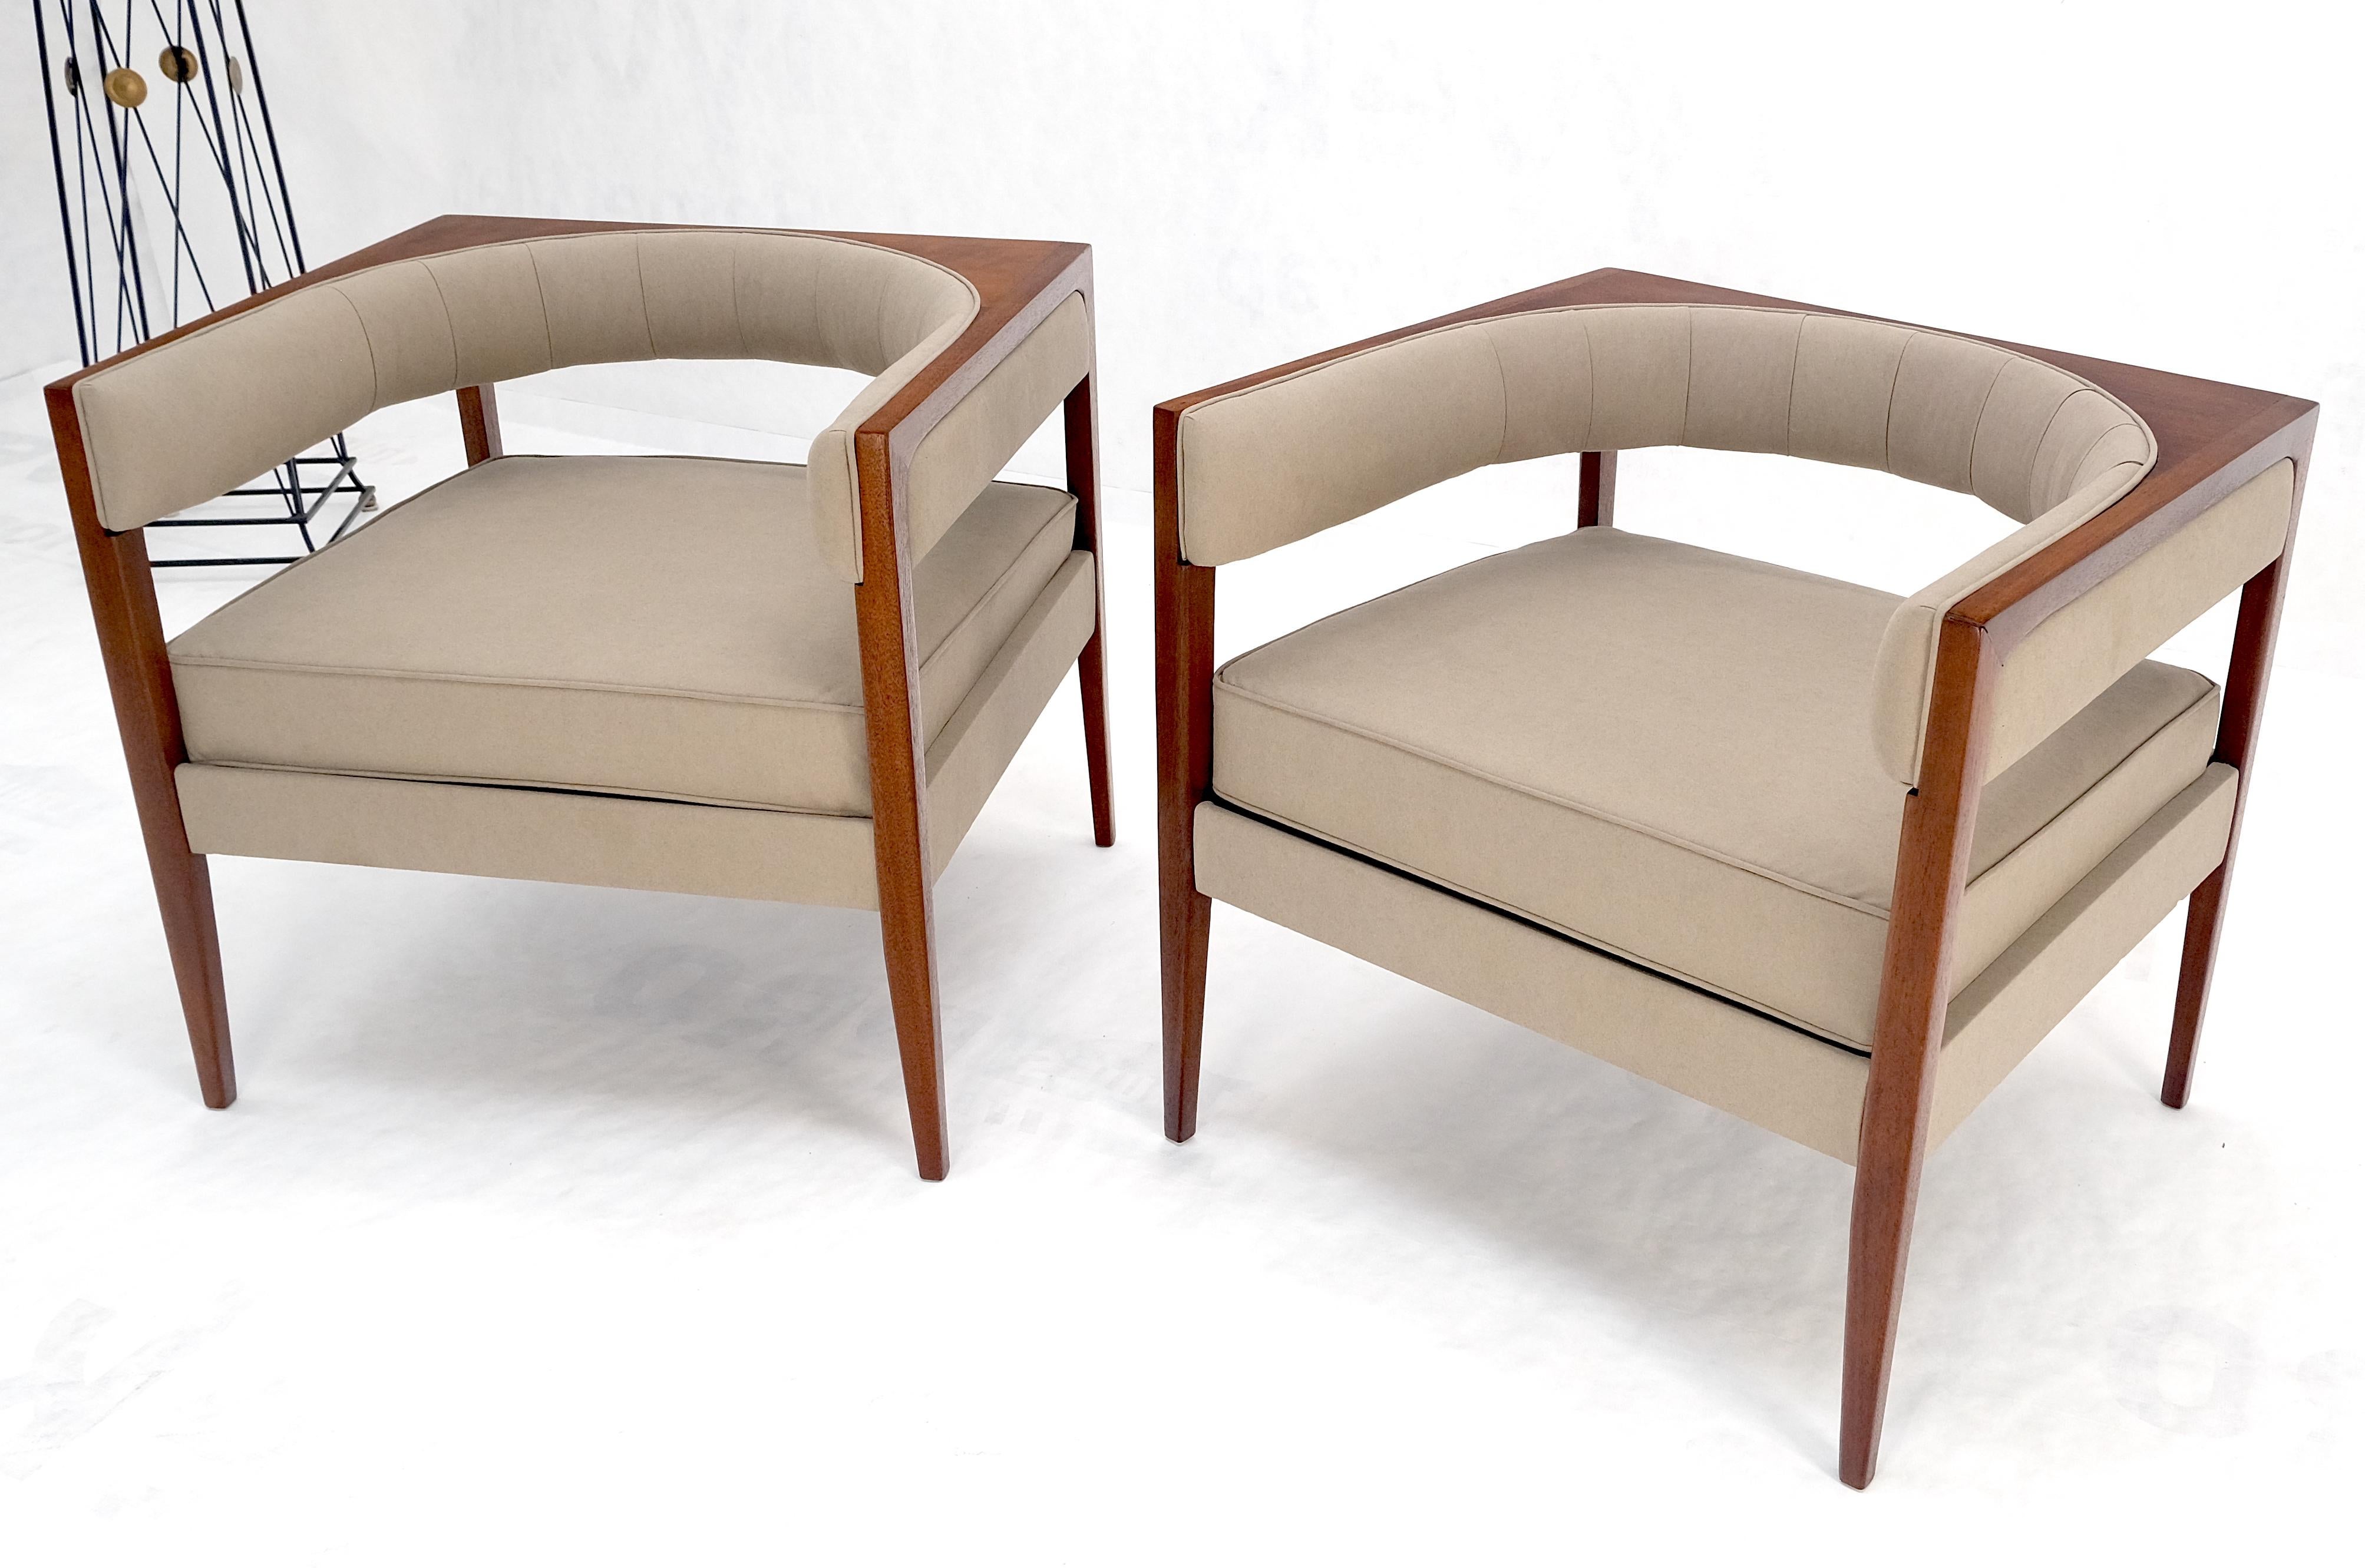 Pair New Alcantera Upholstery Walnut Cube Shape Barrel Back Lounge Chairs MINT! For Sale 4